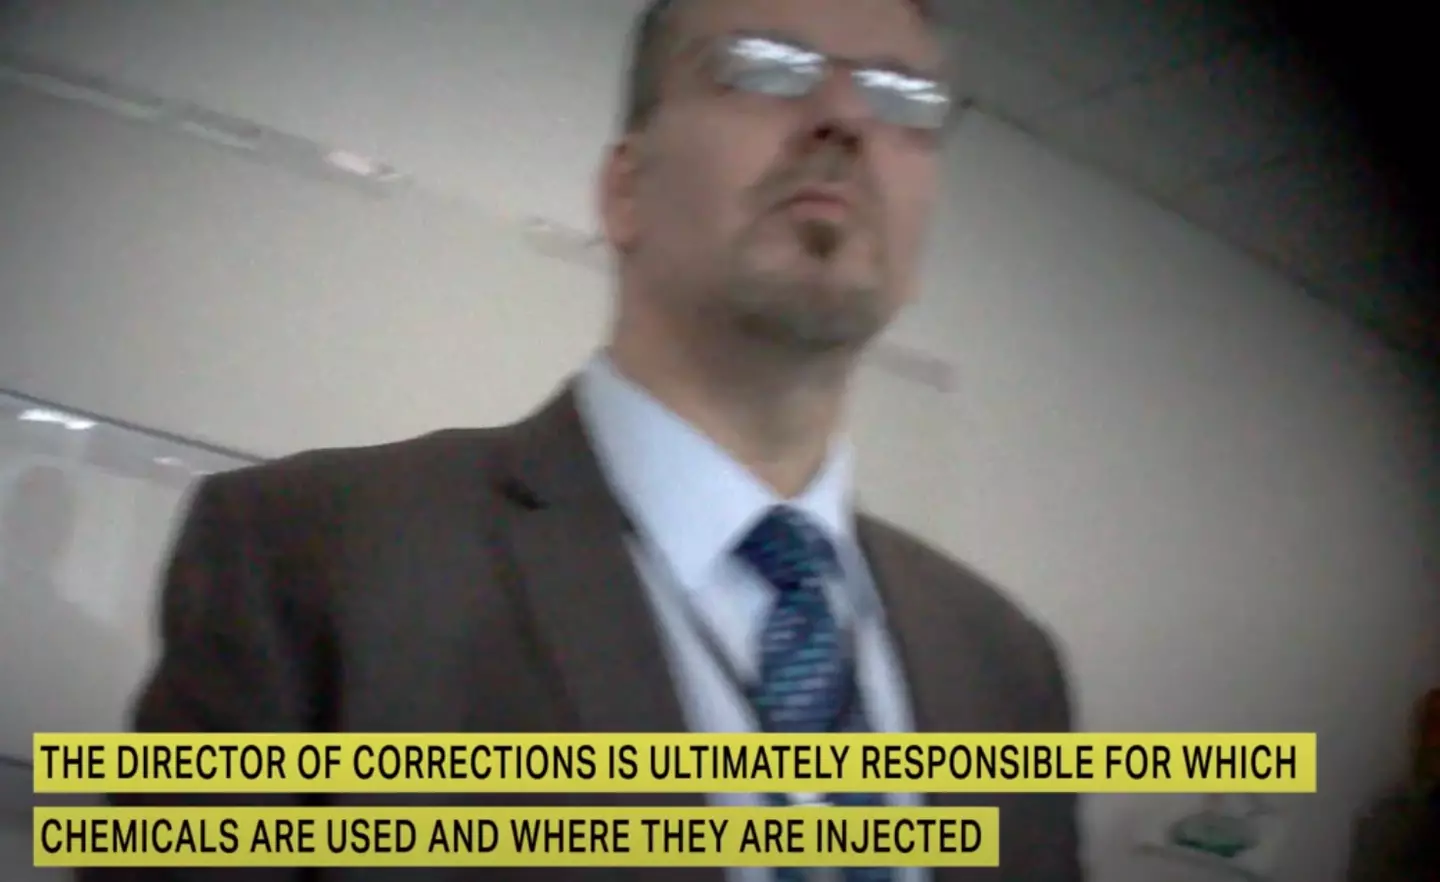 The Director of Corrections is not medically trained according to Death Penalty Fail.